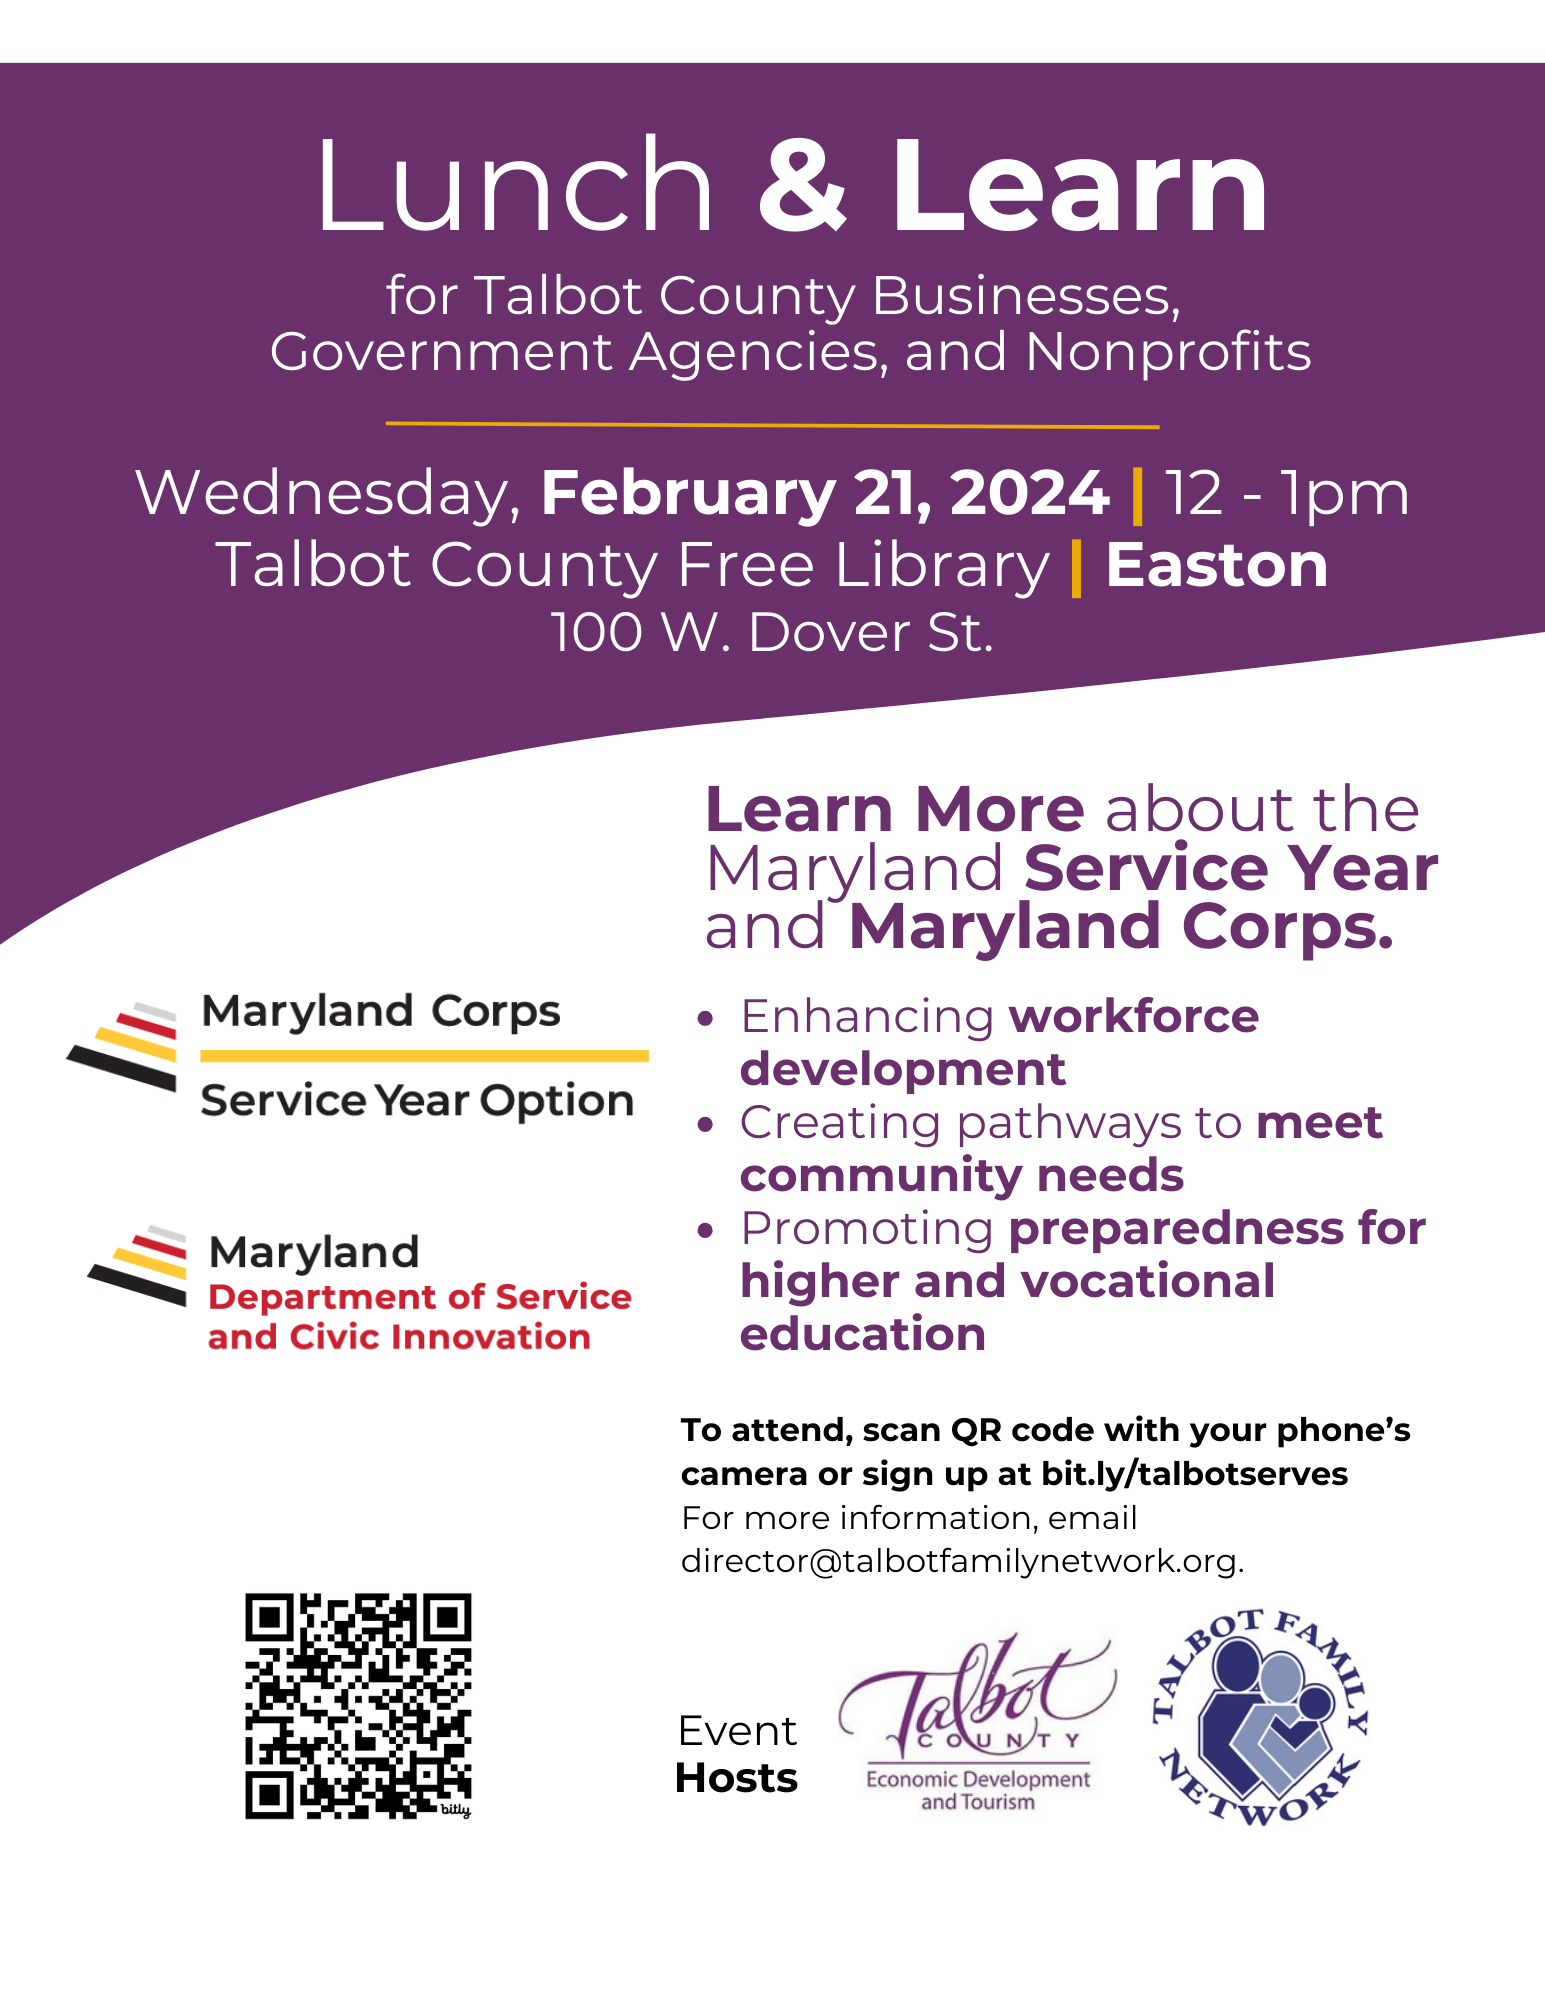 Lunch & Learn DSCI Presentation Maryland Serves and Service Year Option